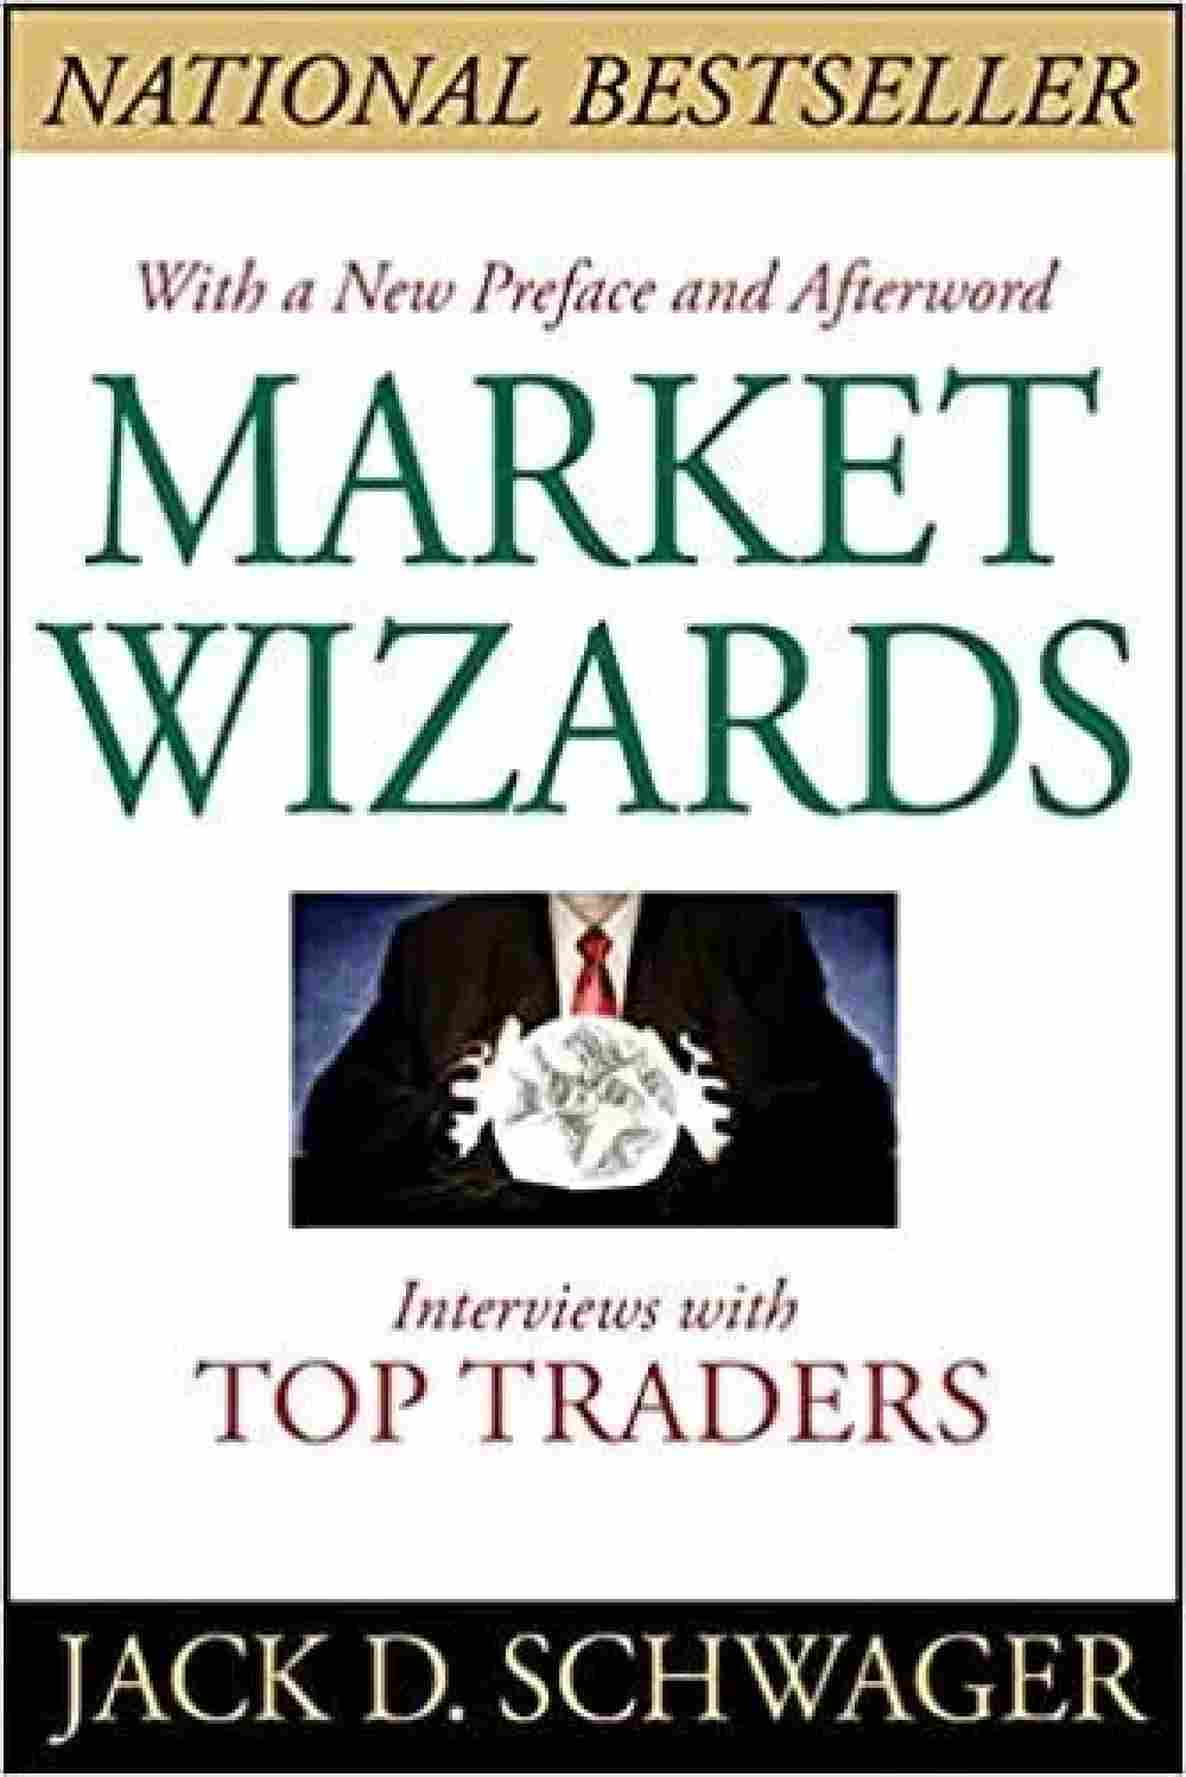 Market Wizards: Interviews with Top Traders (Paperback) - Jack D. Schwager